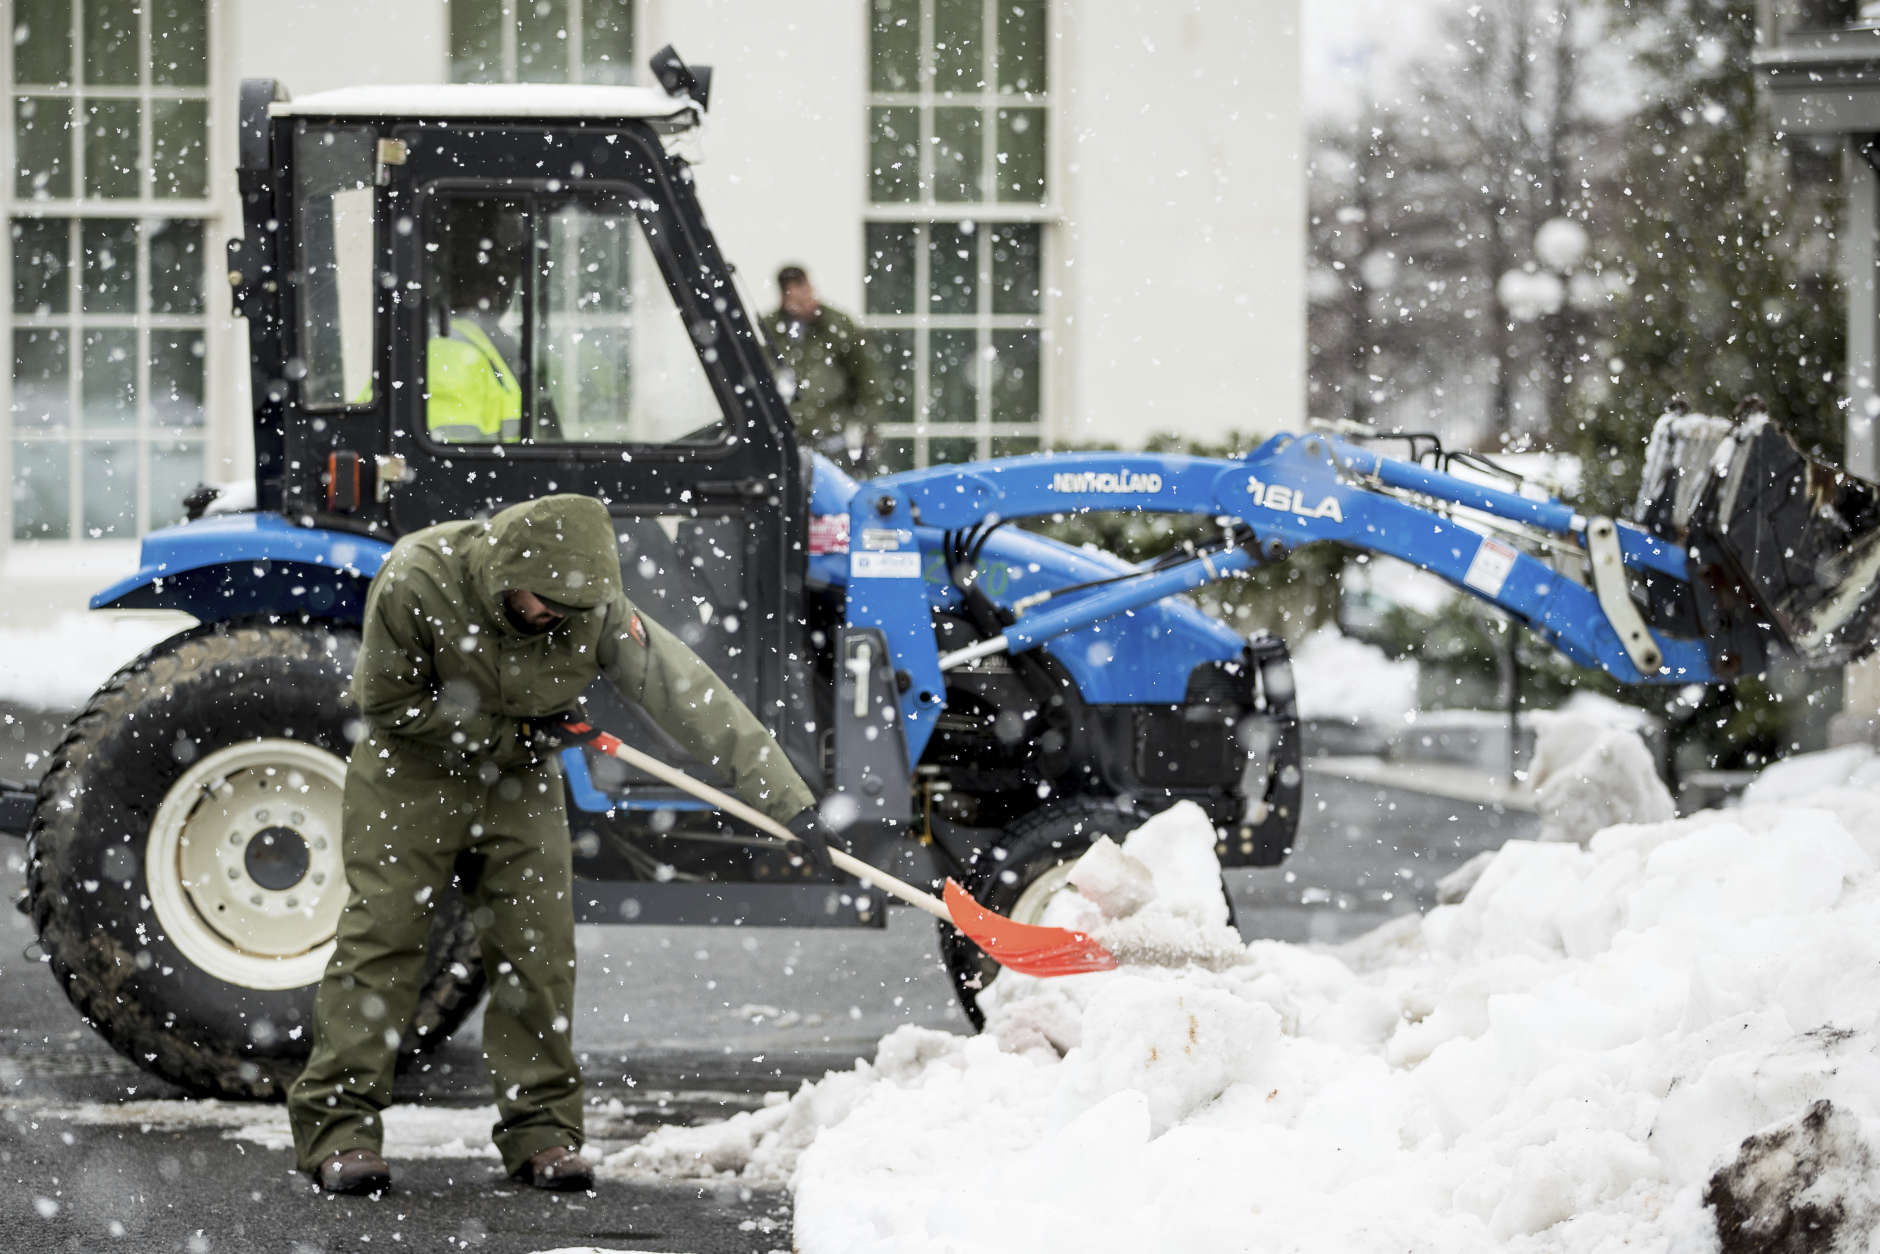 Workers clear snow outside the West Wing of the White House in Washington, Tuesday, March 14, 2017. A sloppy, blustery late-season storm lashed the Northeast with sleet and more than a foot of snow in places, paralyzing much of the Washington-to-Boston corridor after a remarkably mild February had lulled people into thinking the worst of winter was over. (AP Photo/Andrew Harnik)